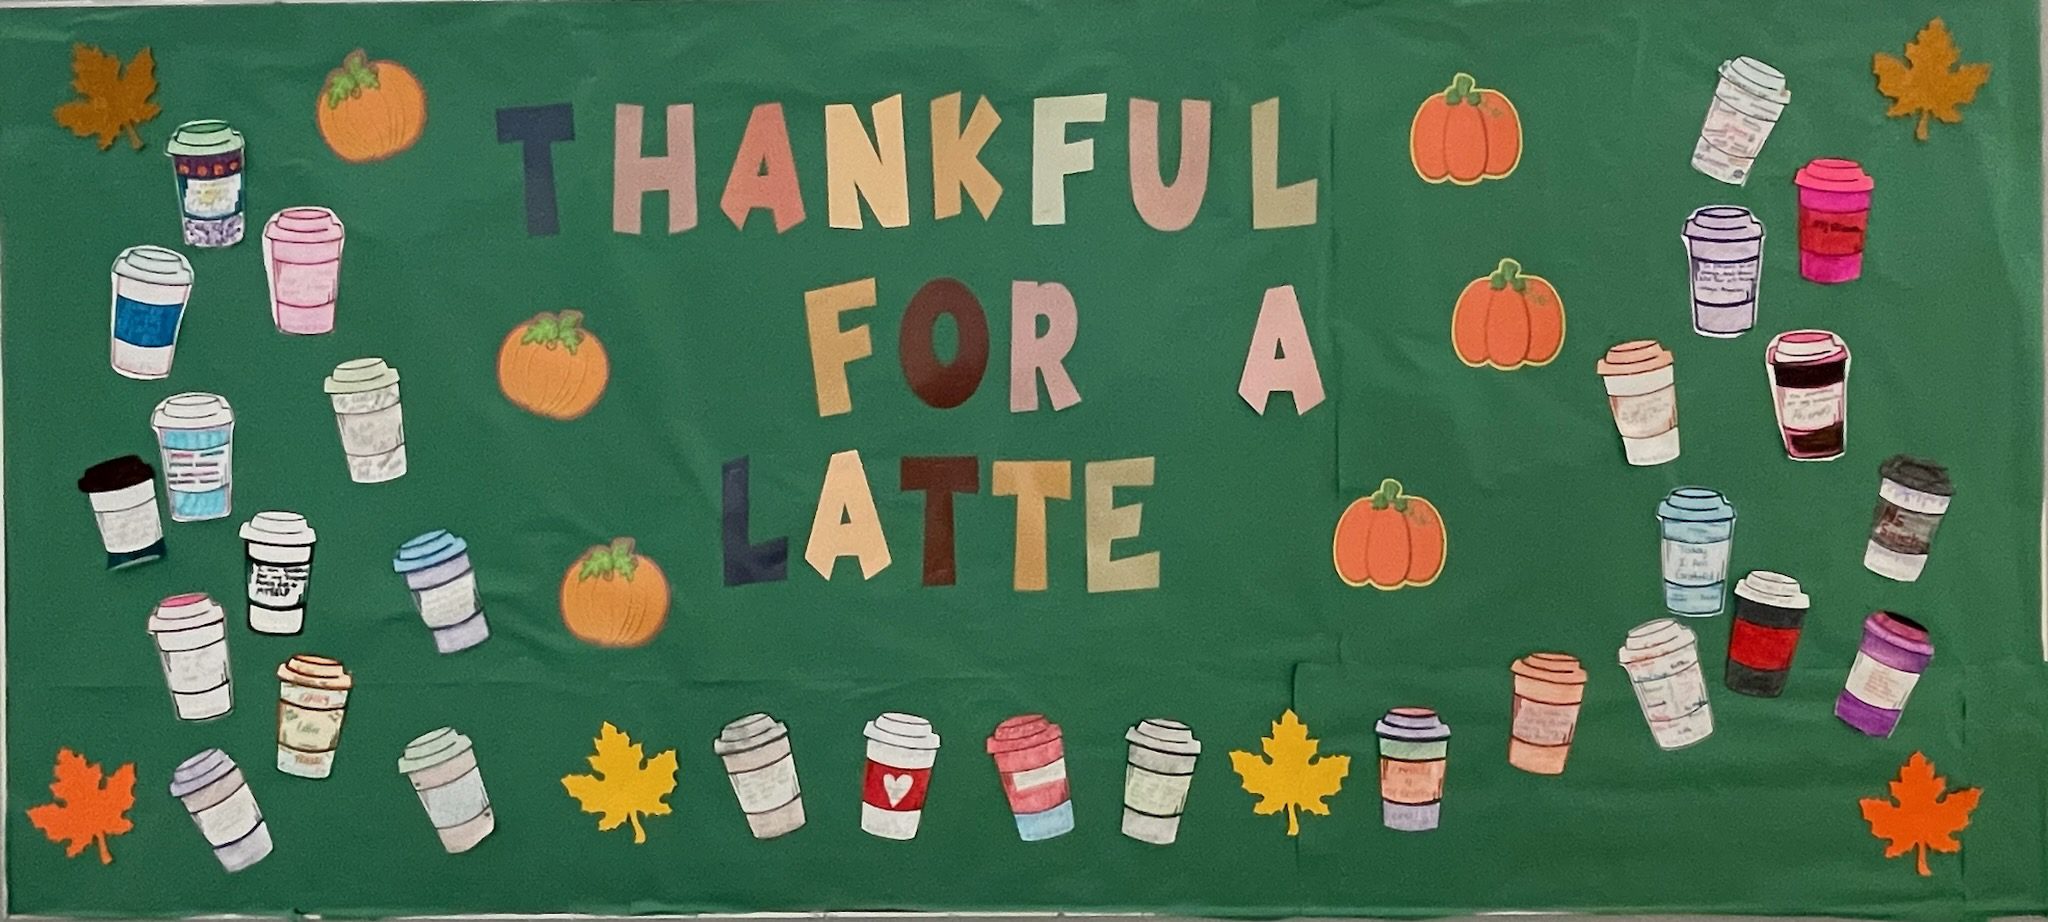 This image shows a dark green bulletin board that has the text "Thankful for a Latte" on it. The words are surrounded by paper drawings of pumpkins, leaves, and latte cups.